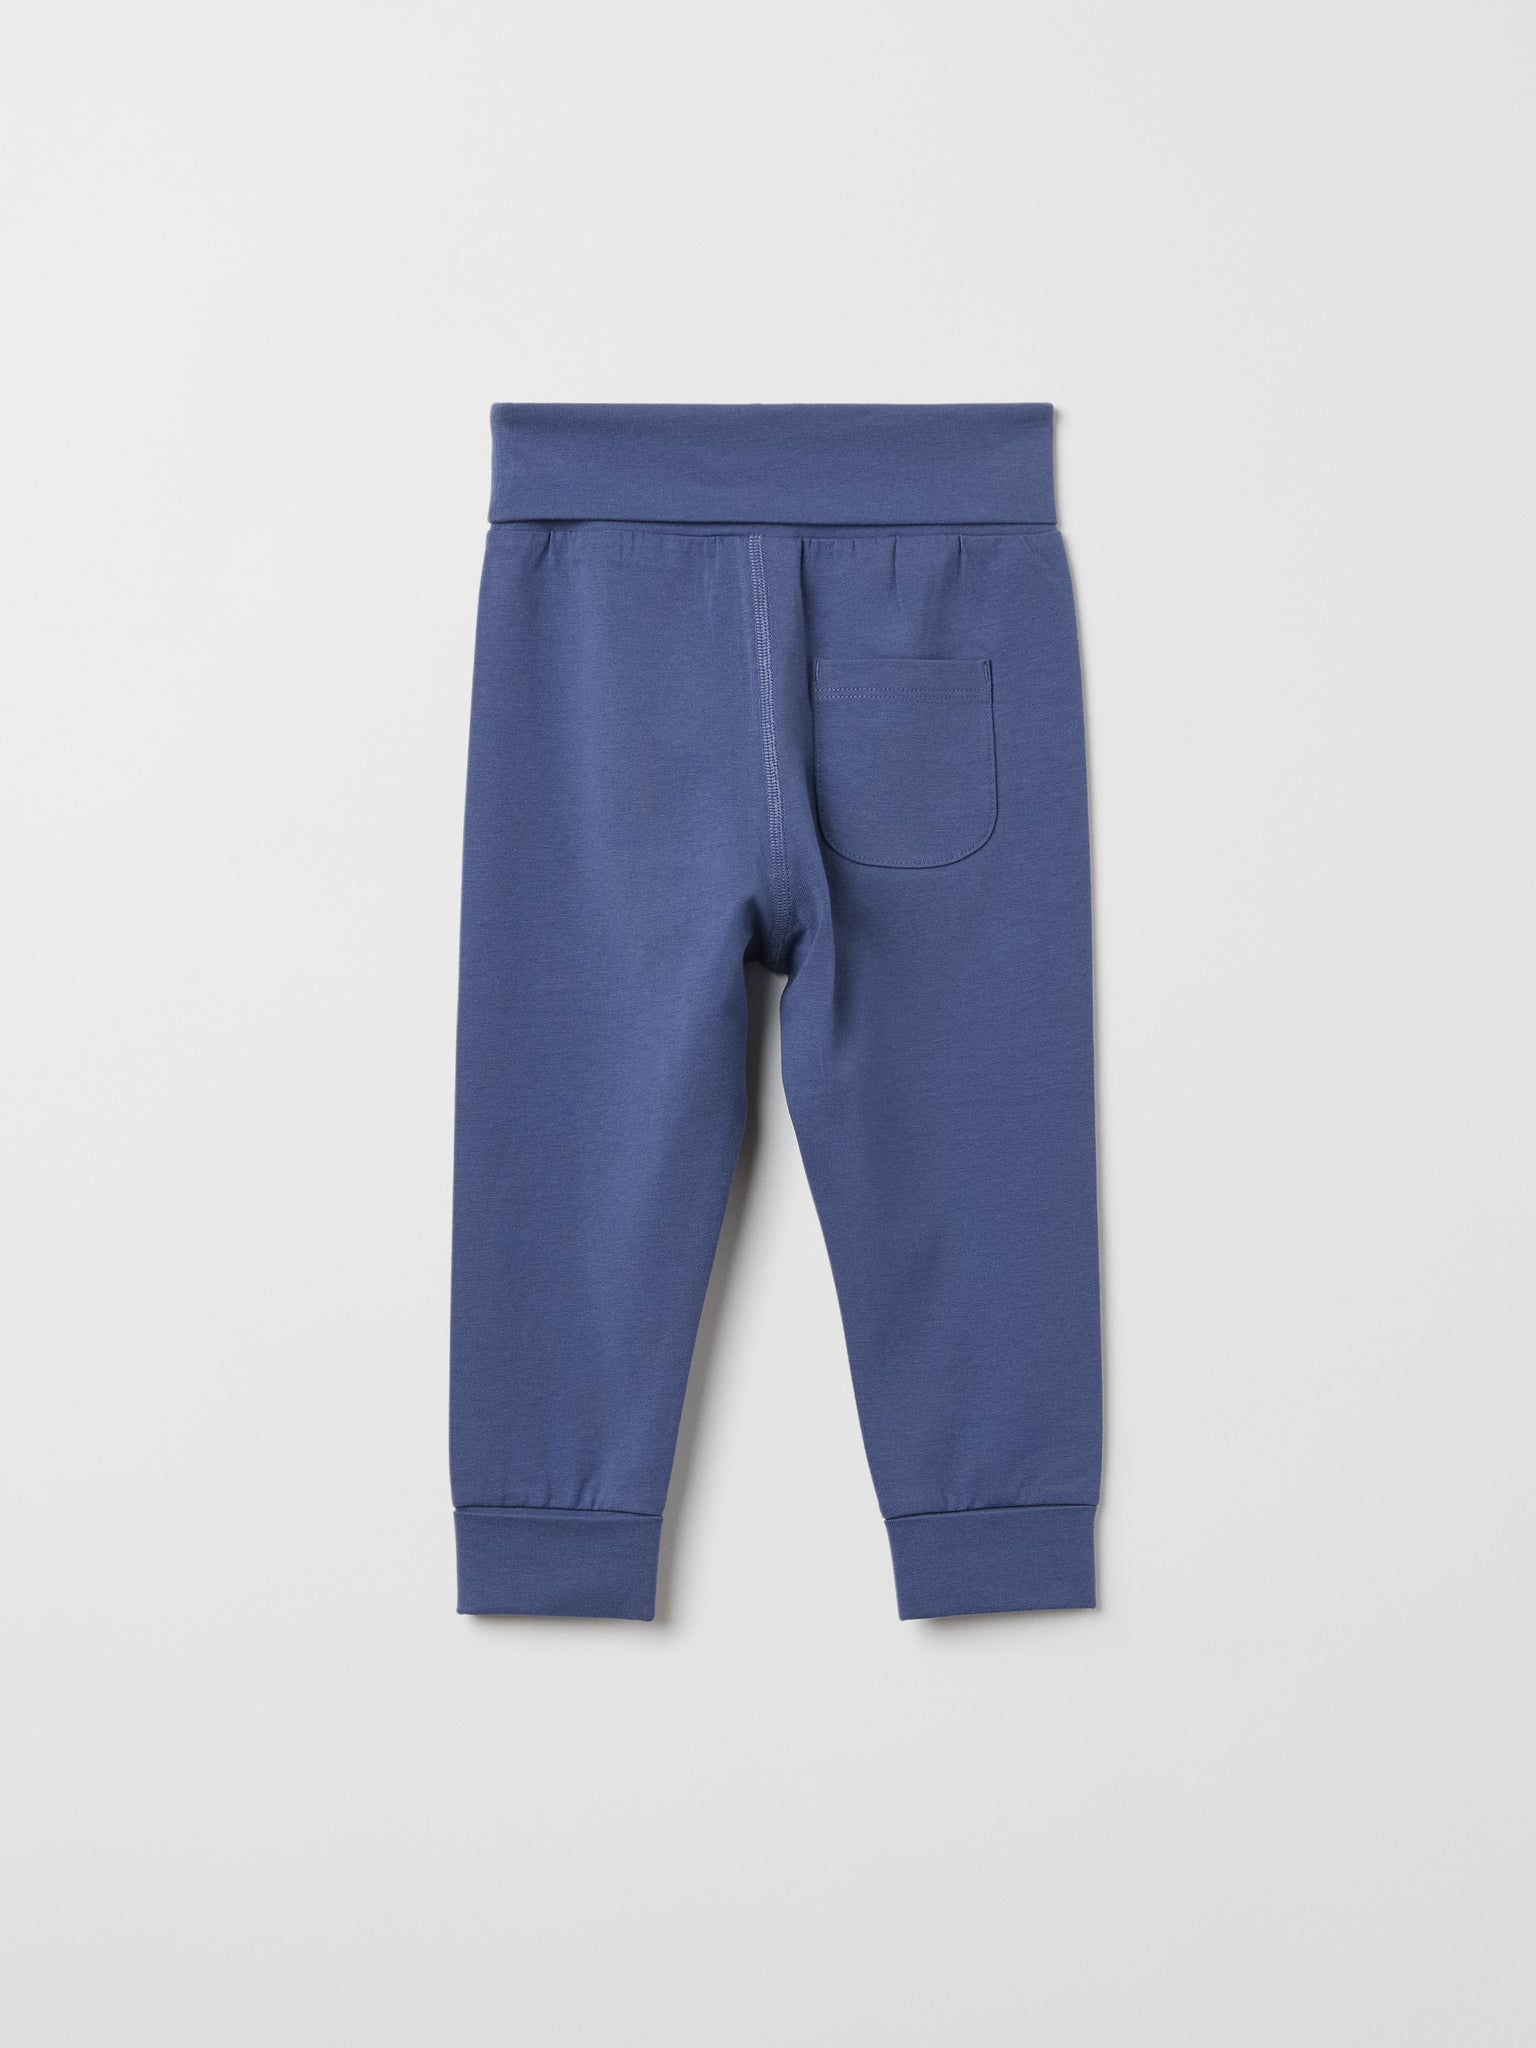 Organic Cotton Blue Baby Leggings from the Polarn O. Pyret baby collection. Clothes made using sustainably sourced materials.